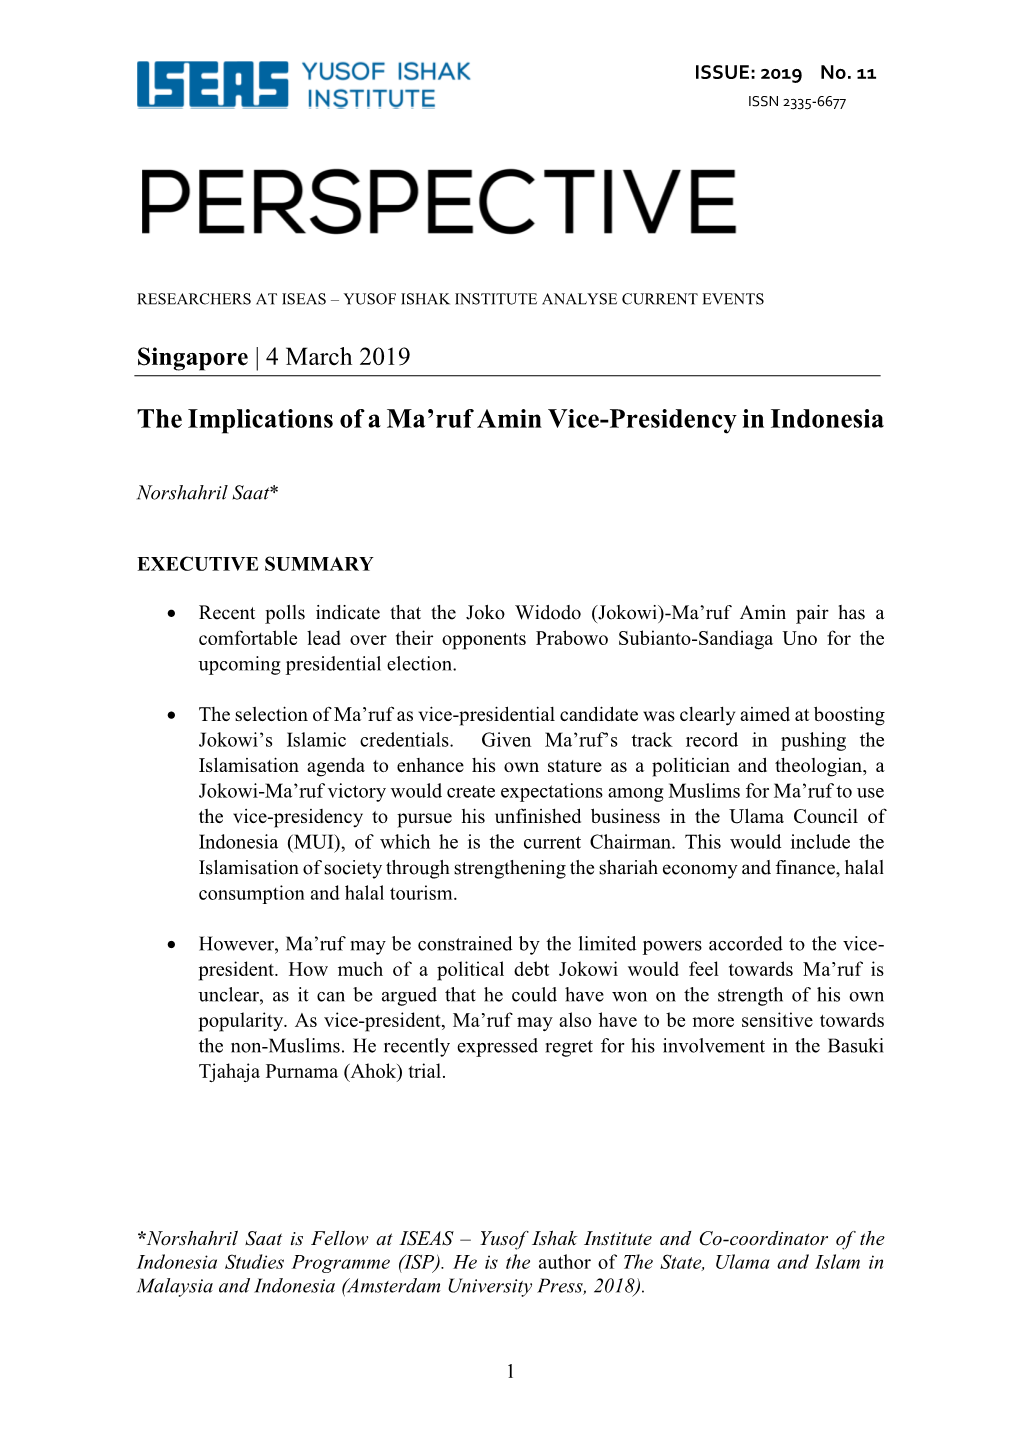 The Implications of a Ma'ruf Amin Vice-Presidency in Indonesia